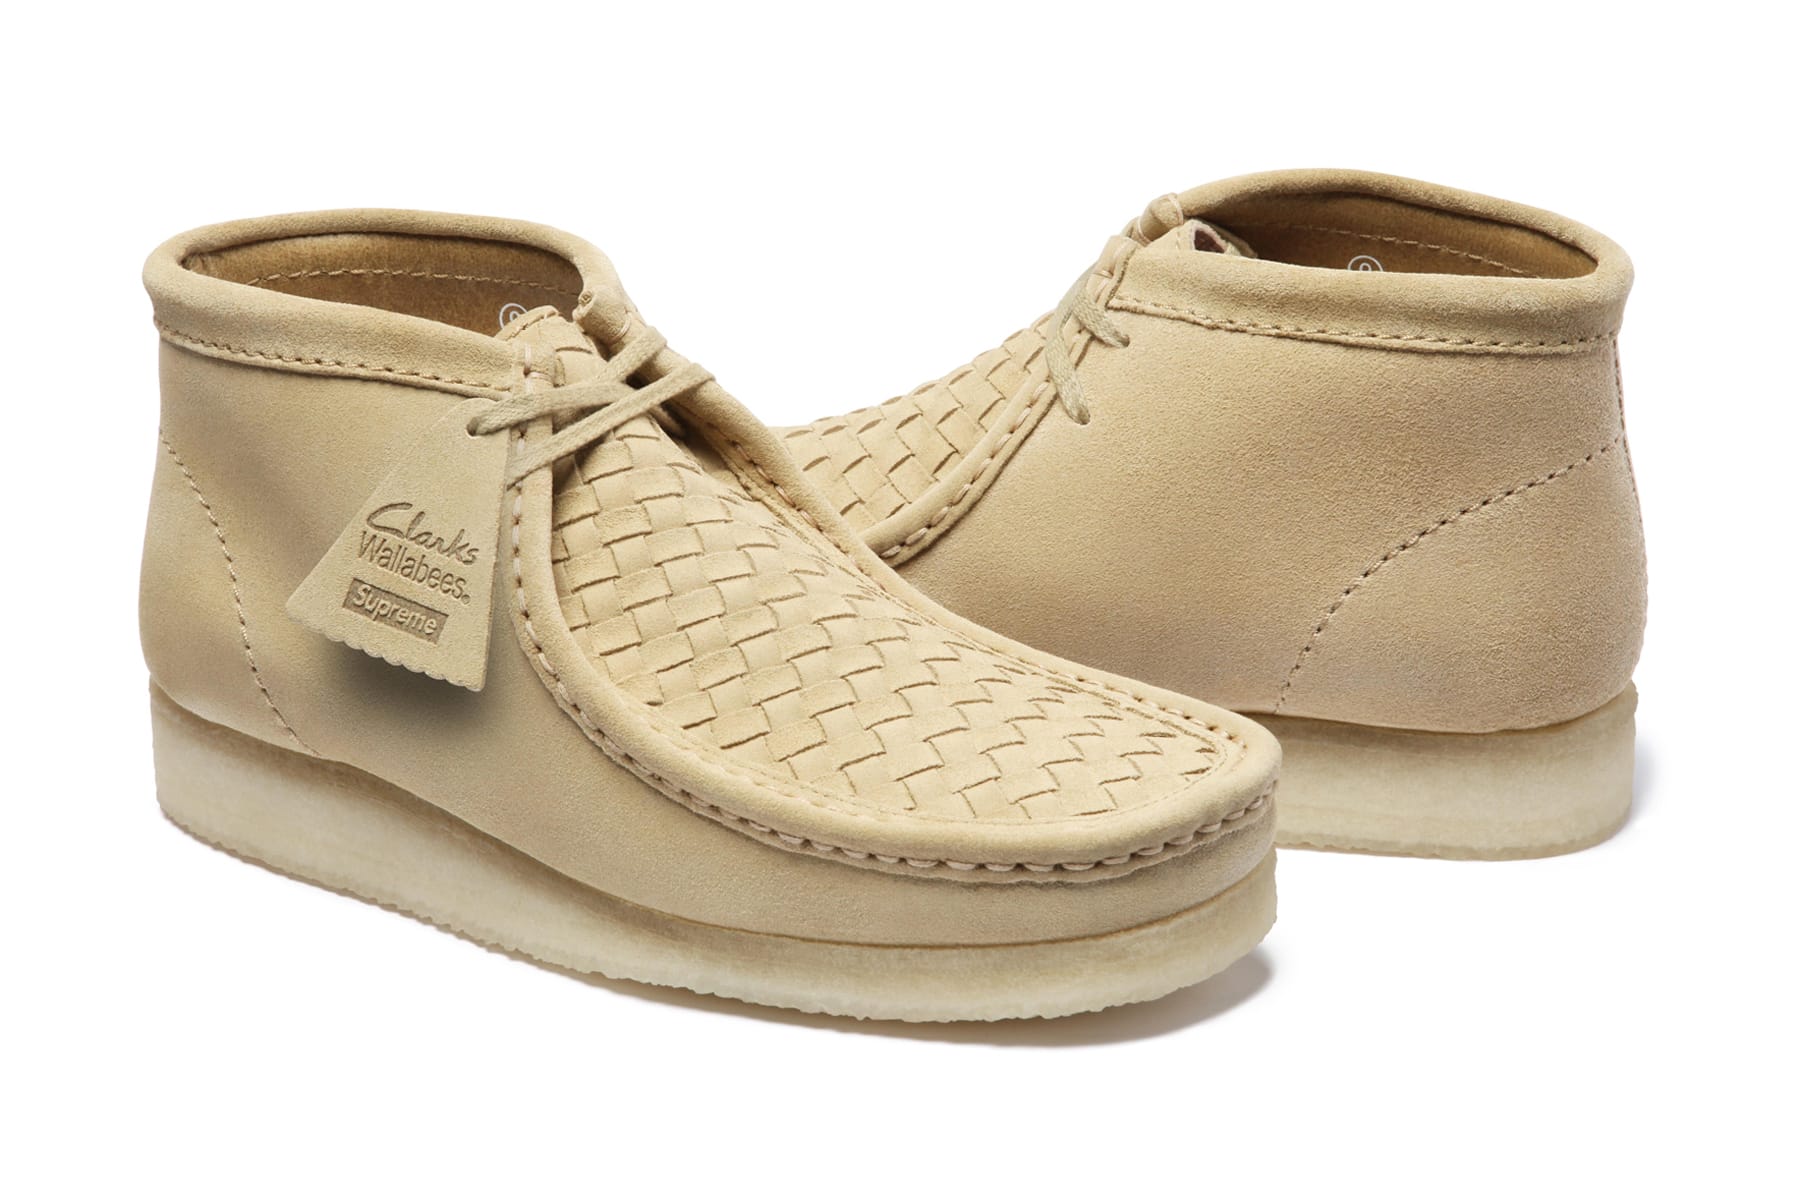 Supreme x Clarks 2016 Spring/Summer Collection | HYPEBEAST